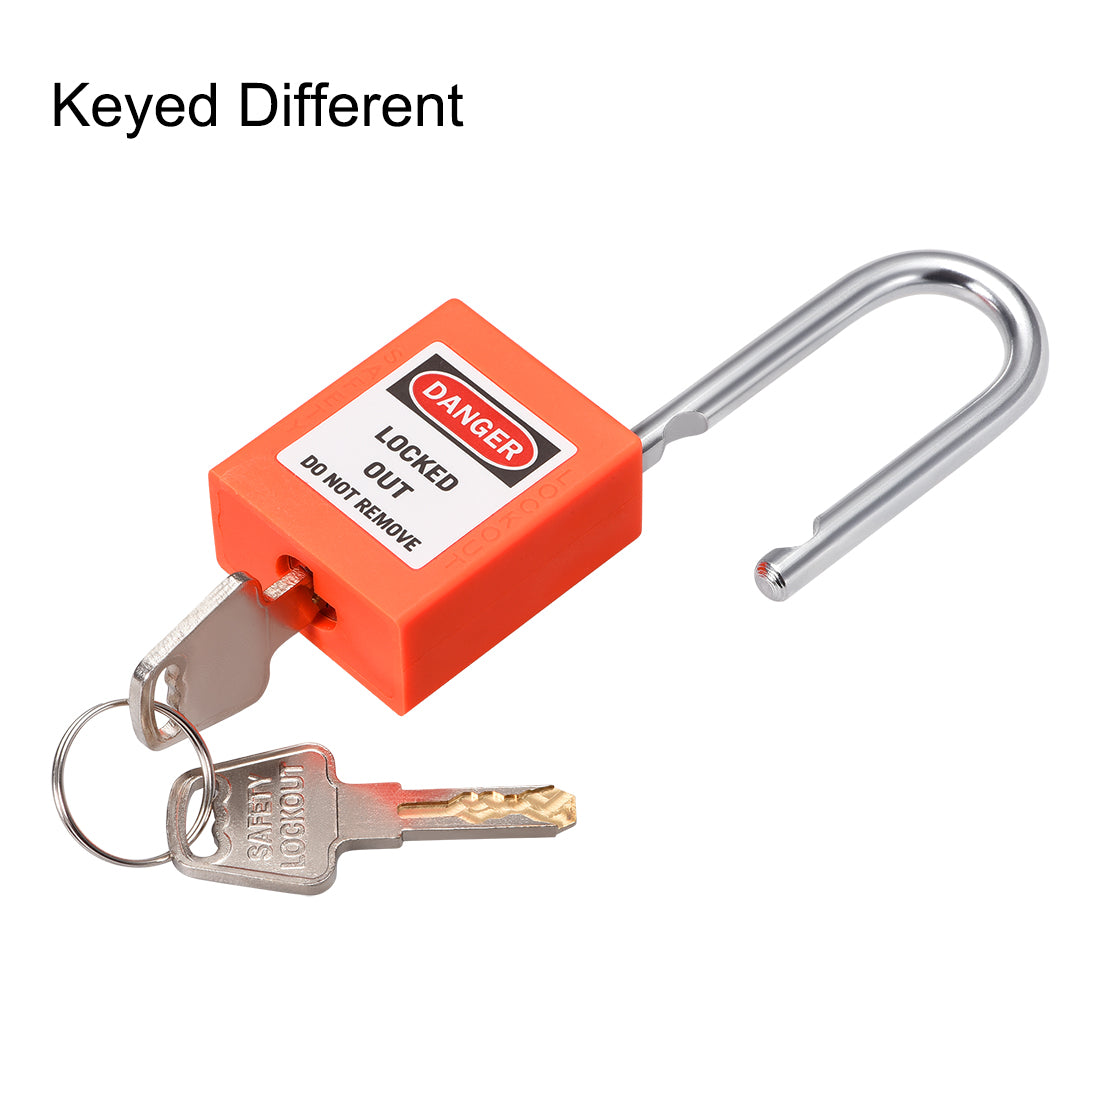 uxcell Uxcell Lockout Tagout Safety Padlock 38mm Steel Shackle Keyed Different Orange